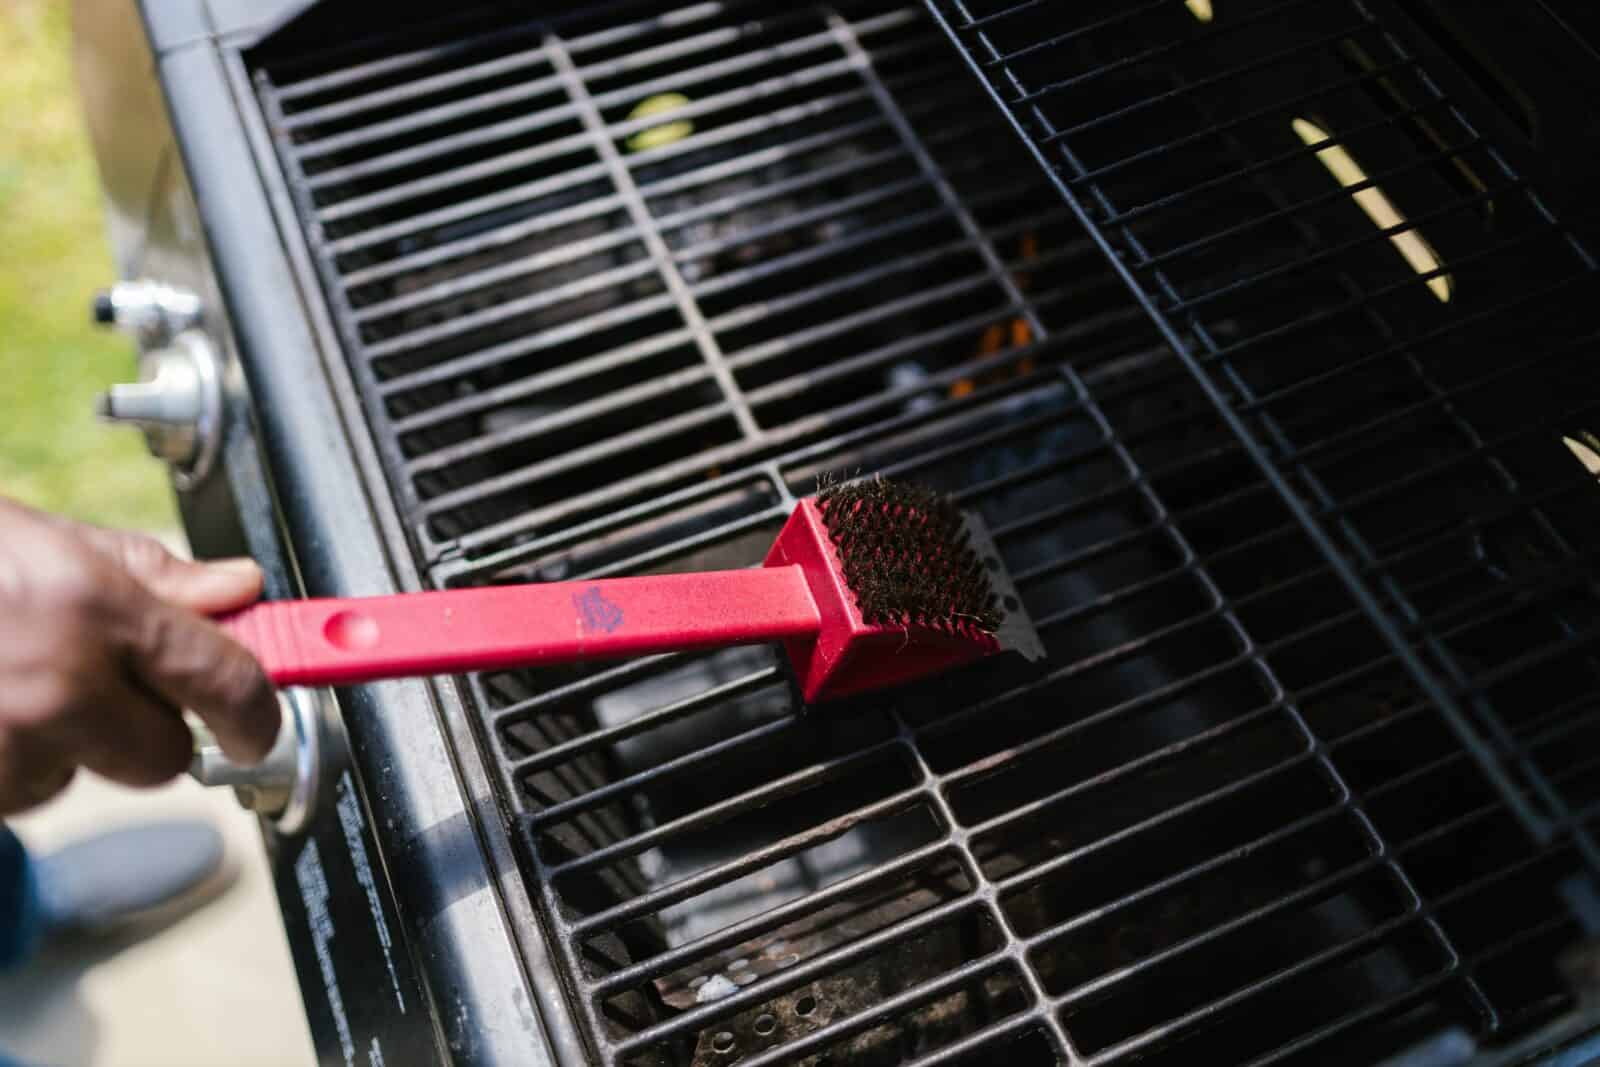 Franchise Concept of The Month : Grill Cleaning Service, The Next BIG Thing